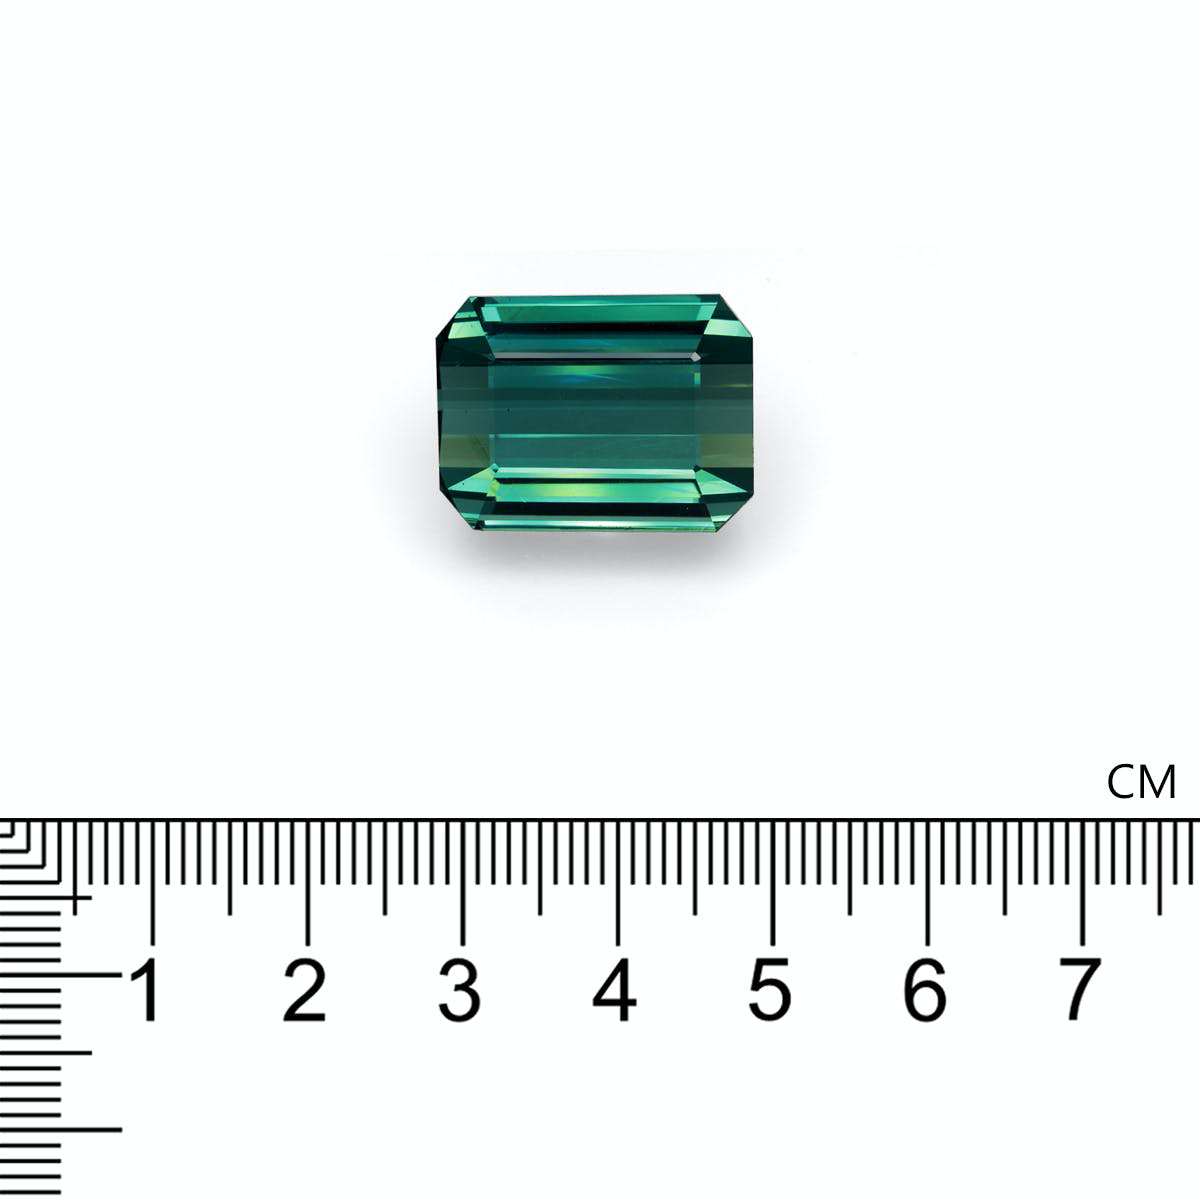 Picture of Teal Blue Tourmaline 37.79ct (TG0460)